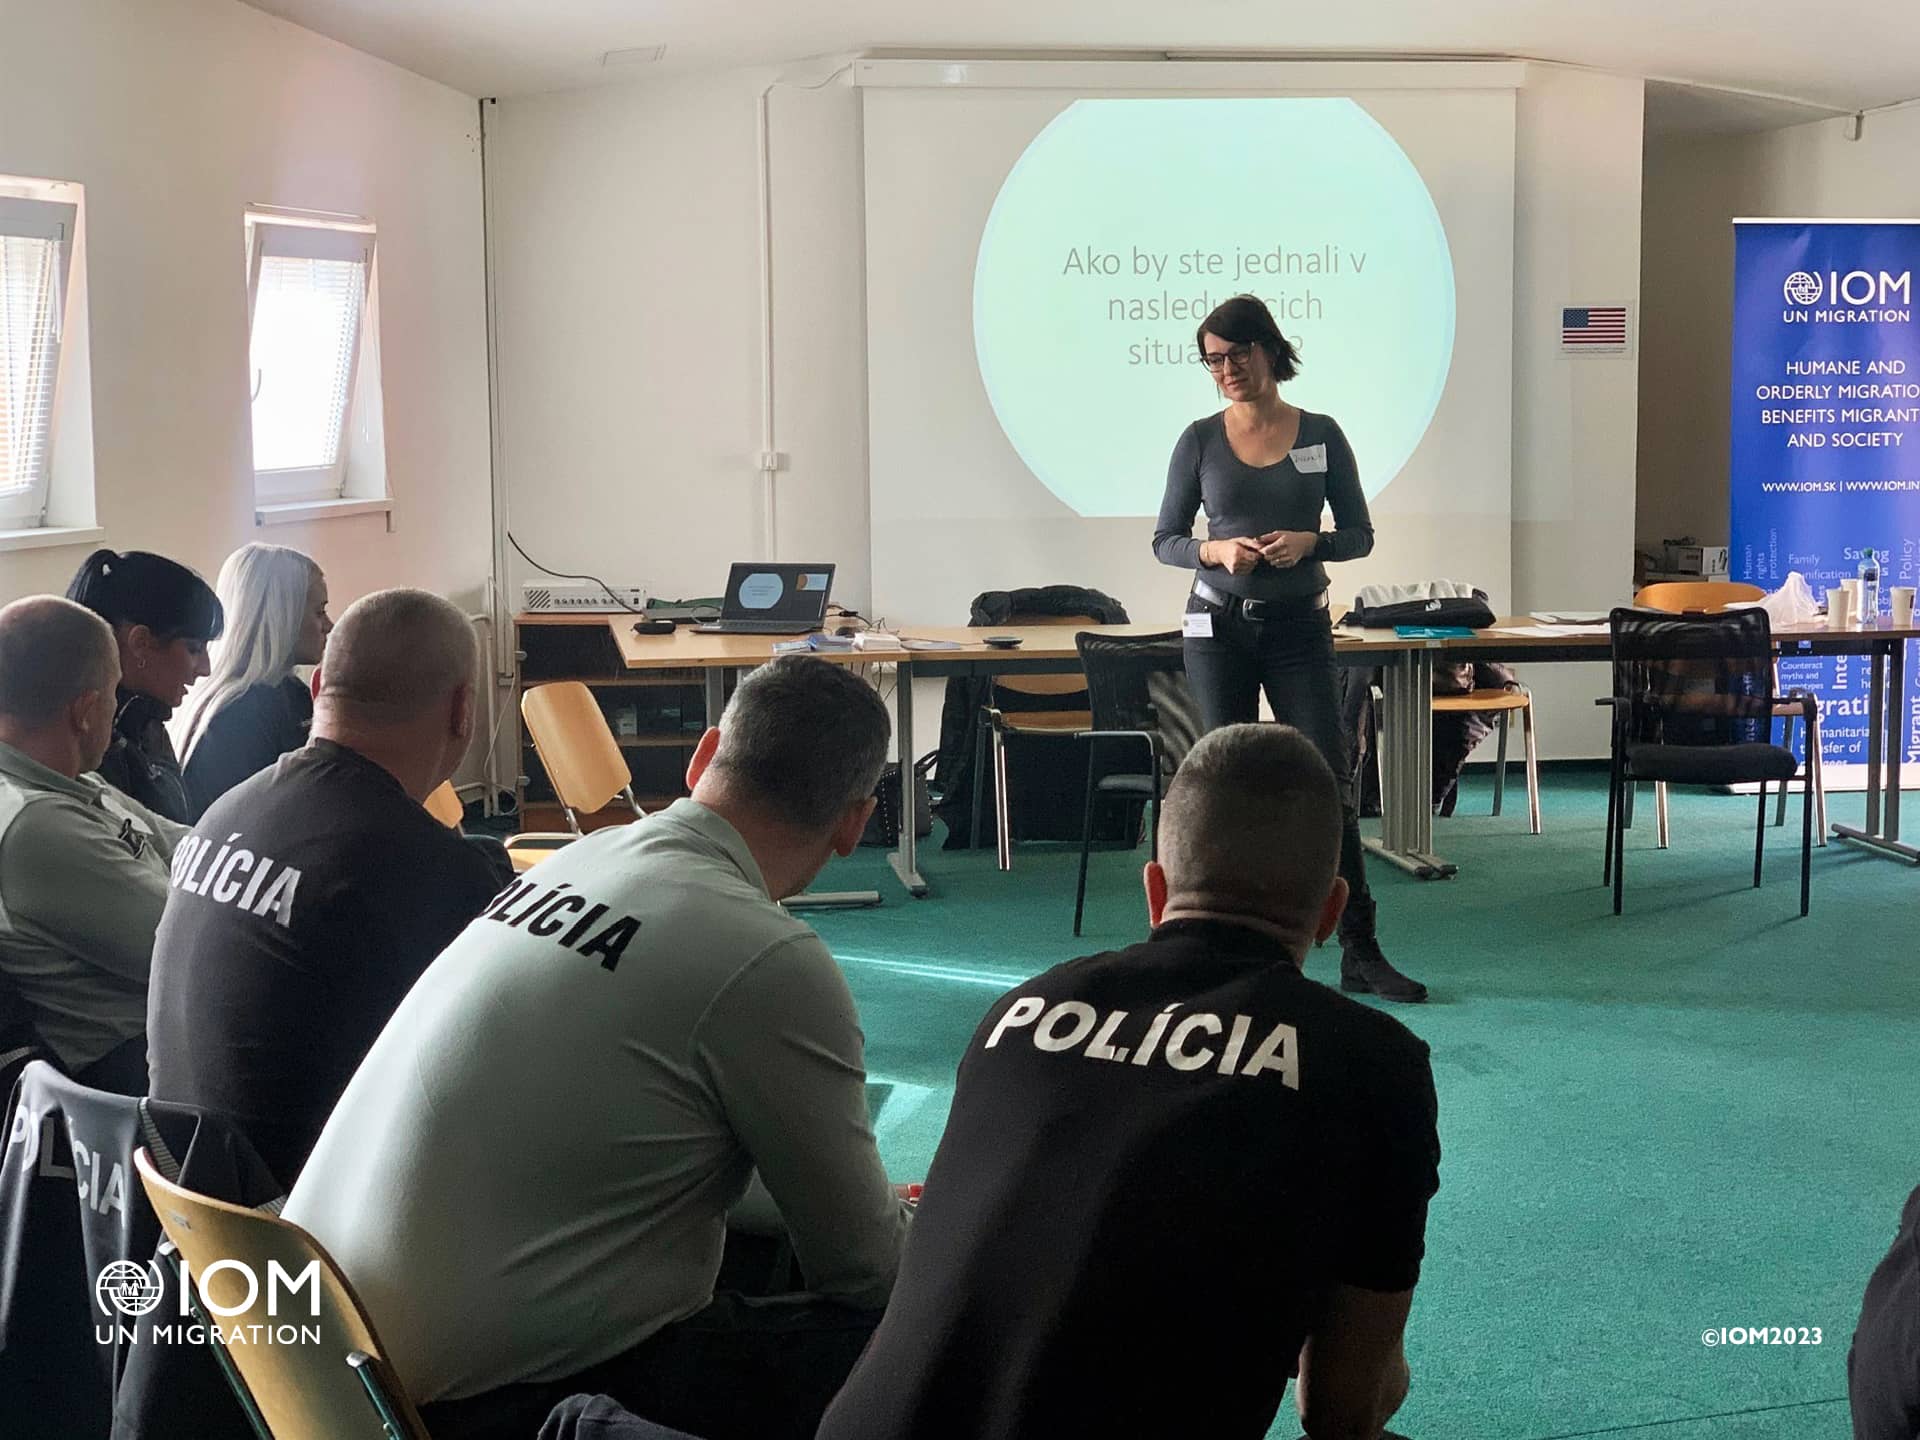 Since February 2022, IOM has organized 100 protection-related trainings, seminars, and workshops for close to 1,300 frontline workers, partners, healthcare professionals, volunteers, and humanitarian workers in Slovakia. Photos © International Organization for Migration (IOM) 2023.